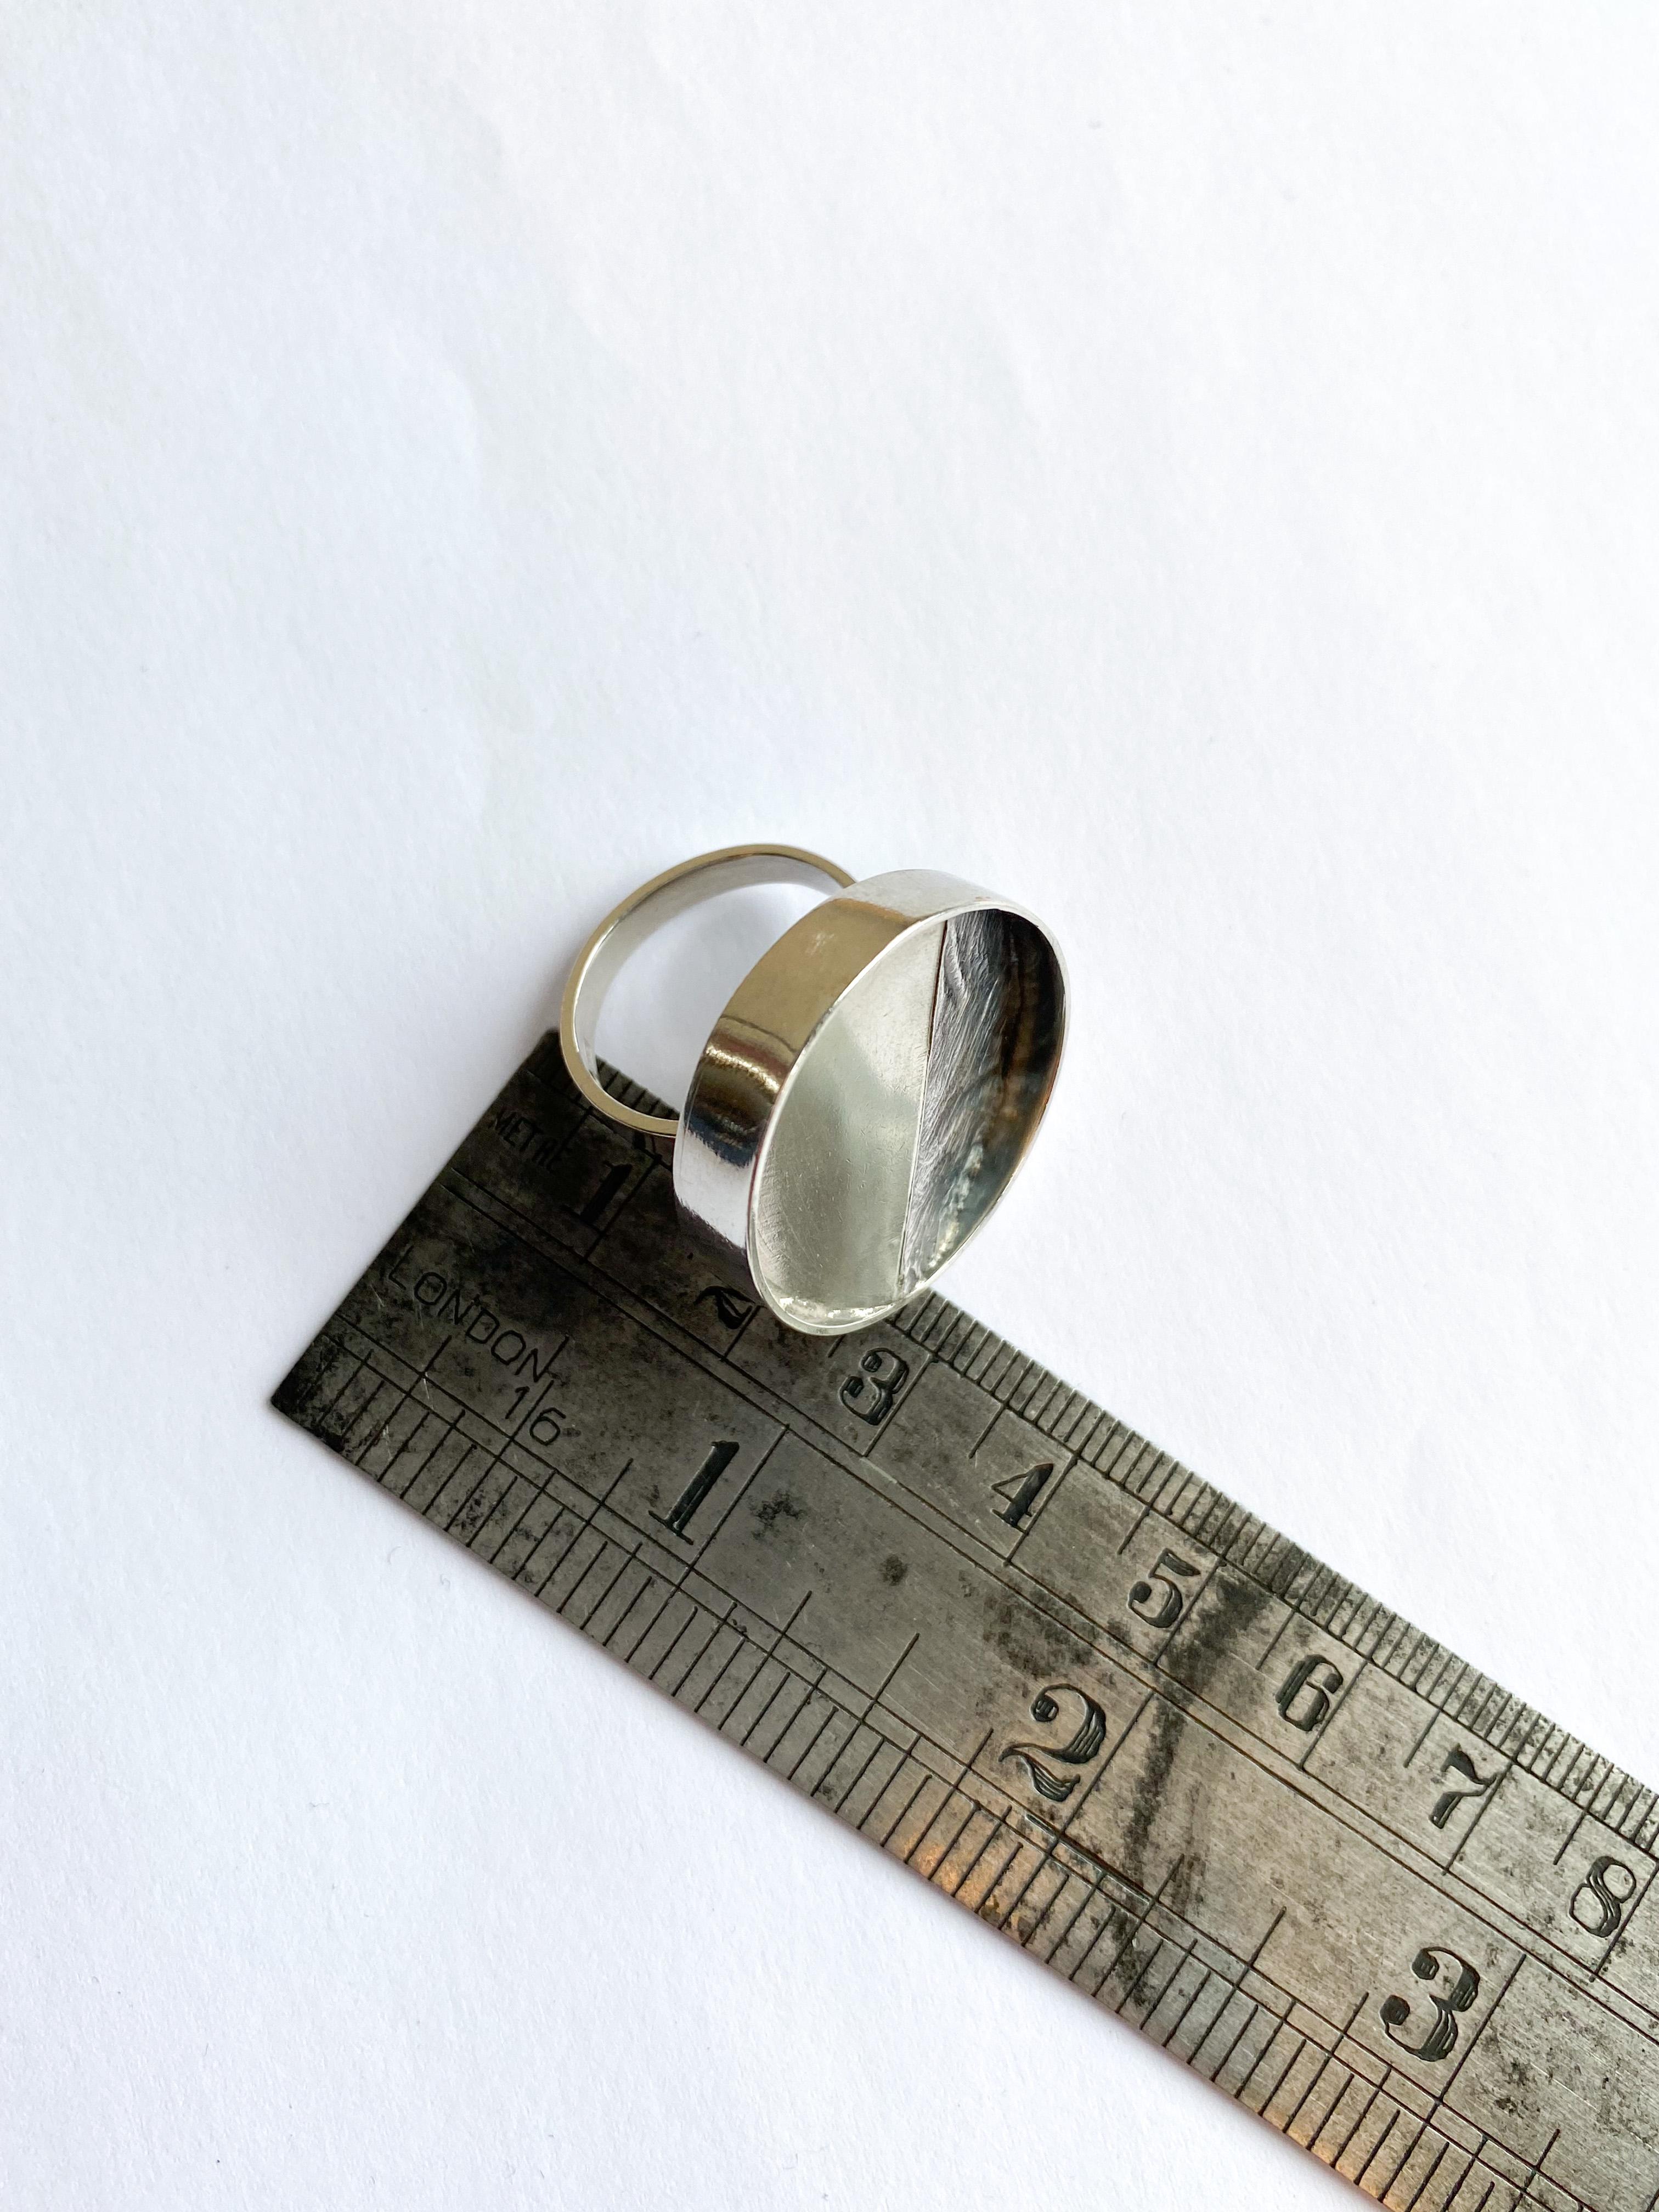 85mm ring size